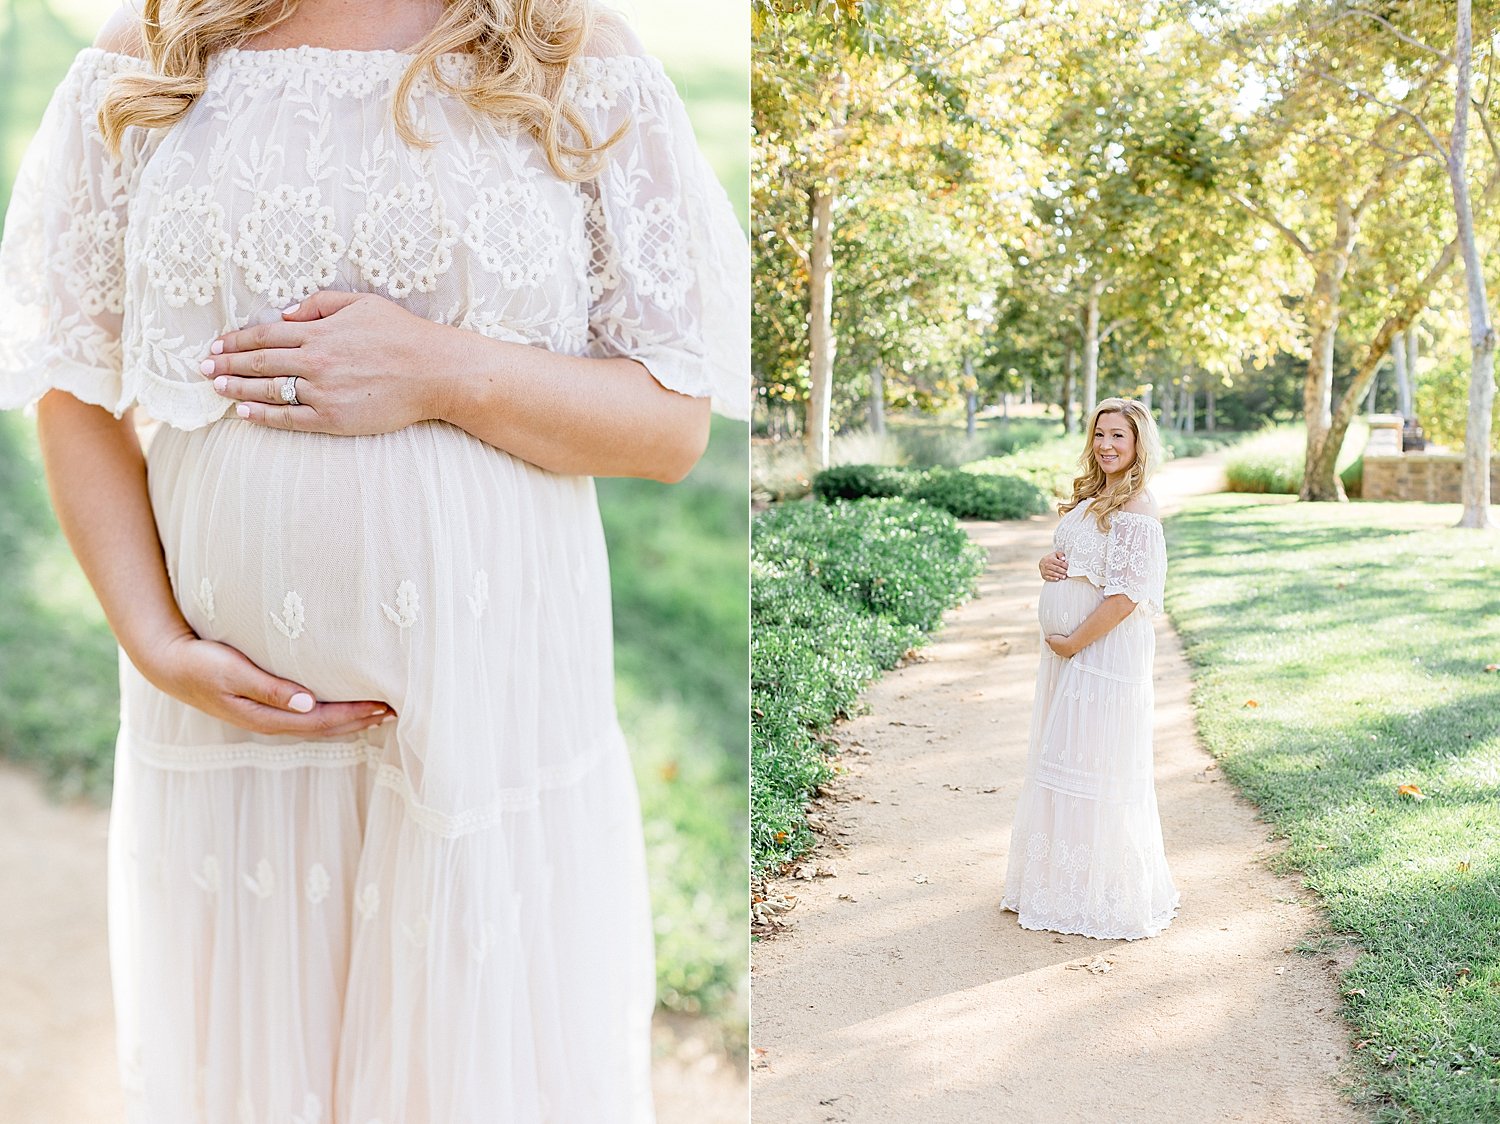 Sunset maternity session at the Jeffrey Trail. Photo by Ambre Williams Photography.